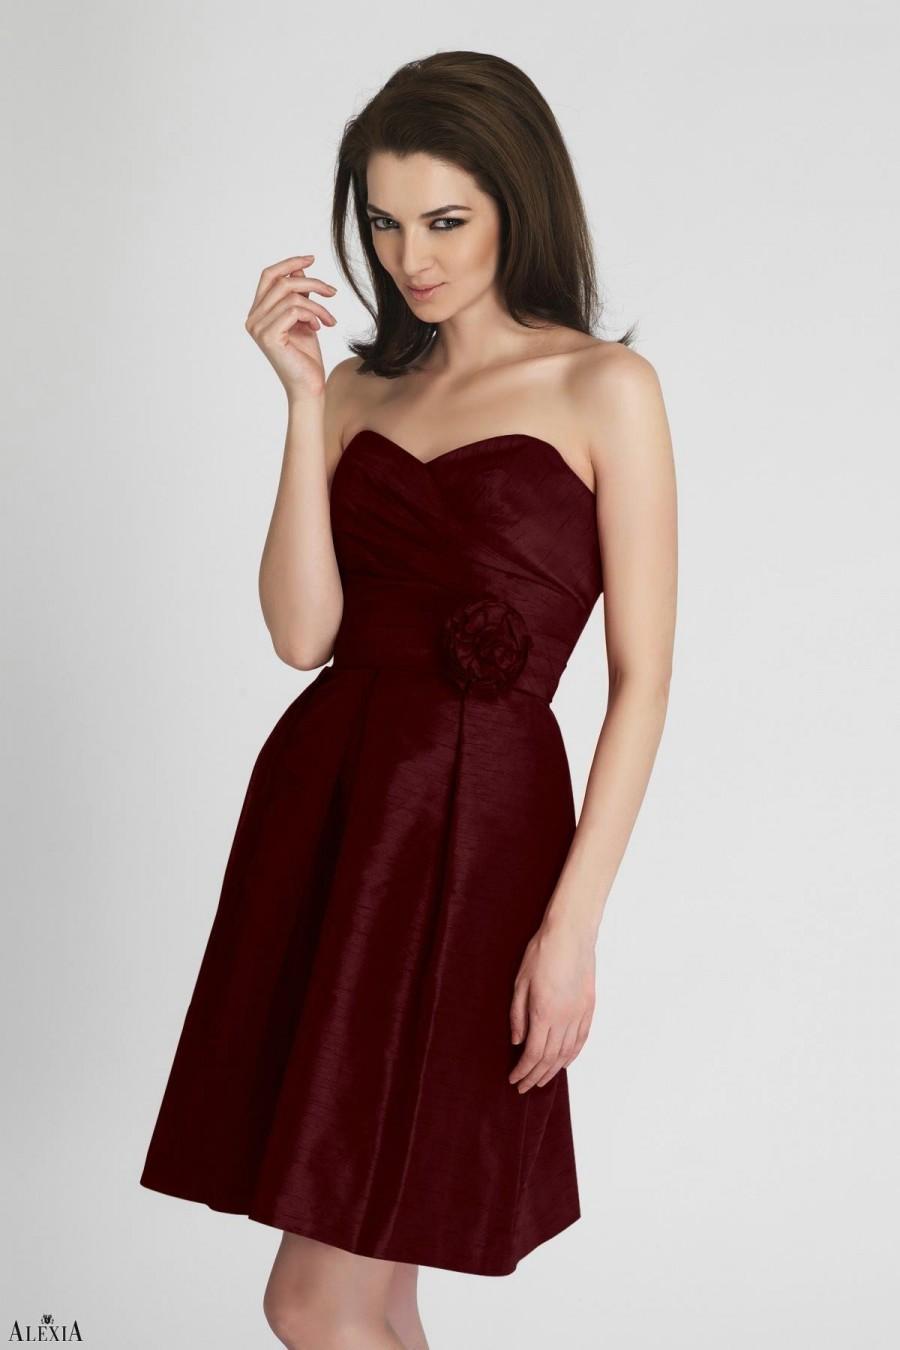 Mariage - Alexia Bridesmaid Dresses - Style 4116/116L - Formal Day Dresses